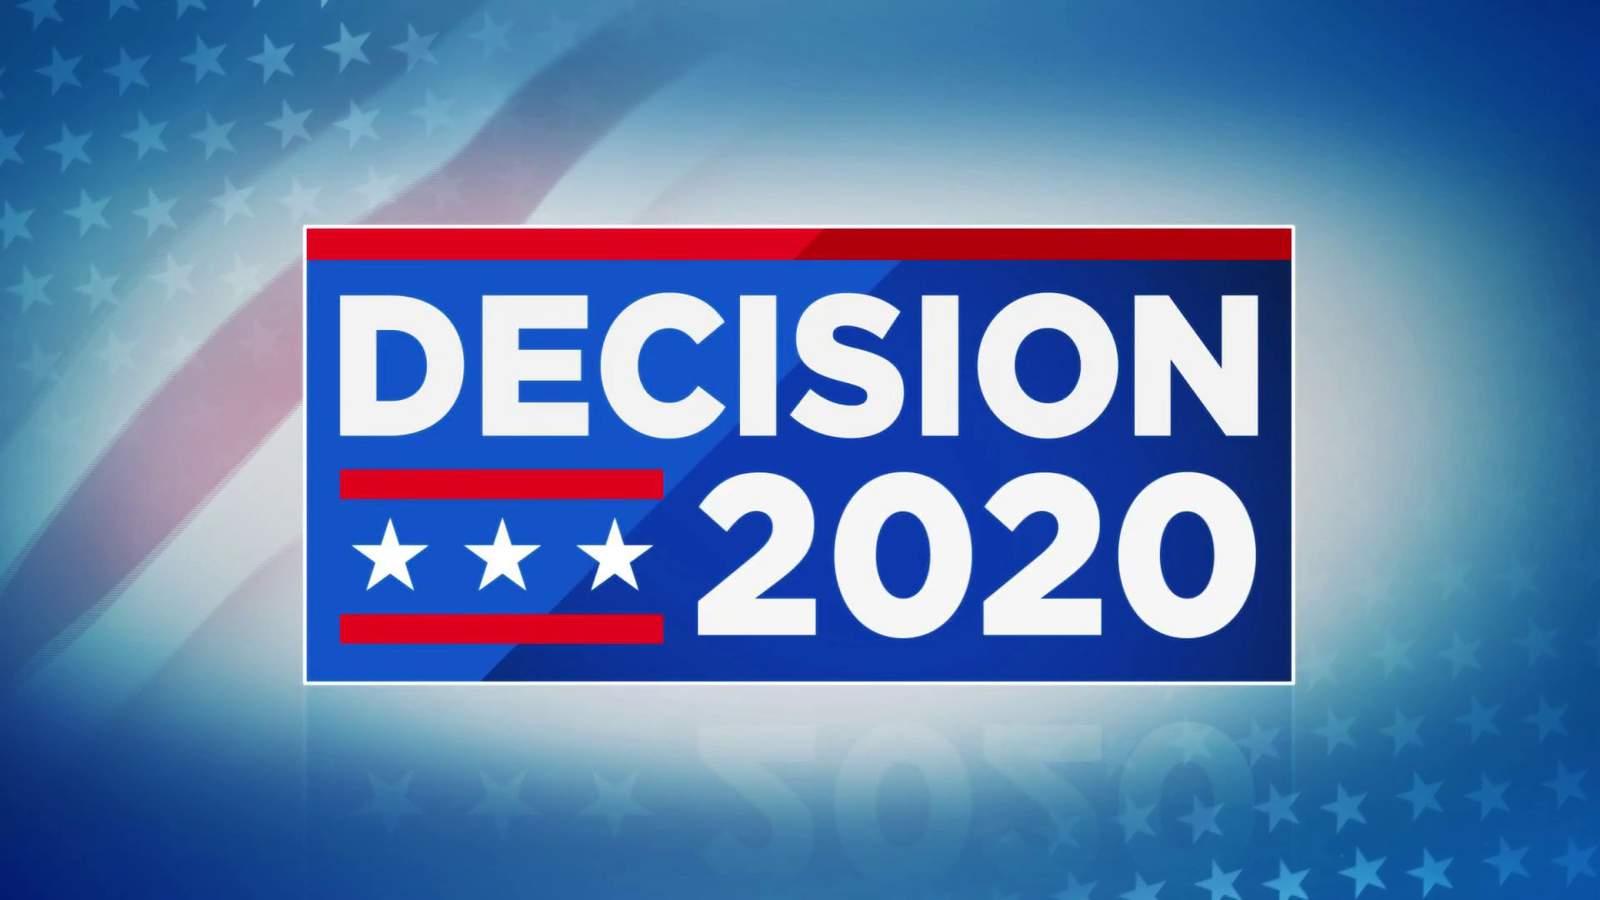 Virginia General Election Results for Appomattox County on Nov. 3, 2020